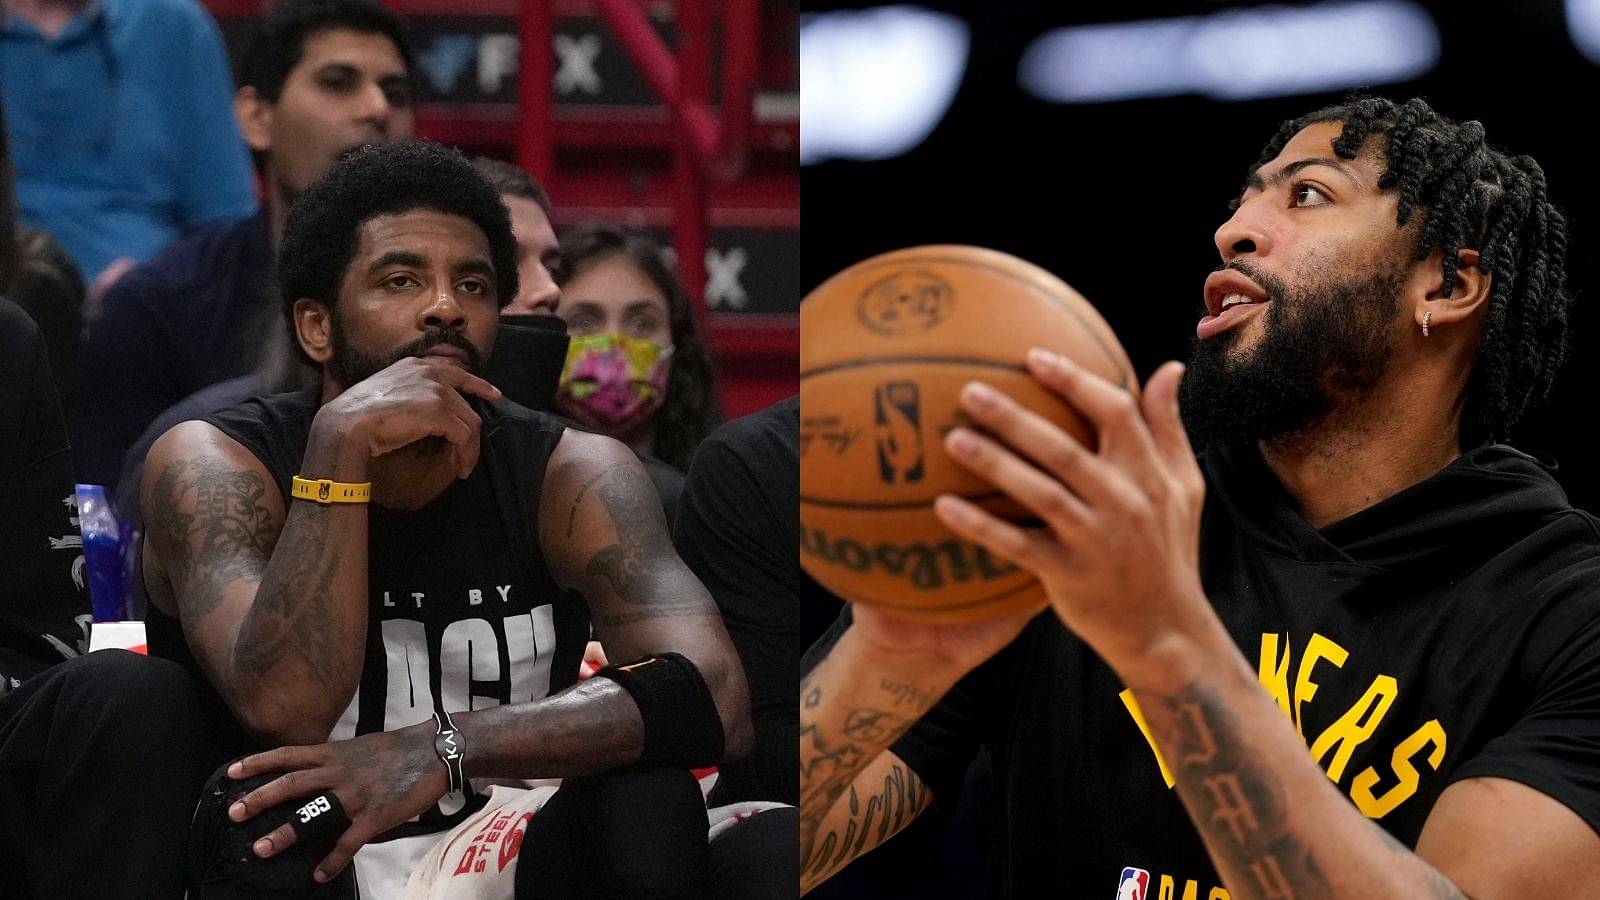 "Kyrie Irving tried recruiting Anthony Davis to the Celtics": Report reveals the Nets superstar's plan that could have altered the NBA as we see it today